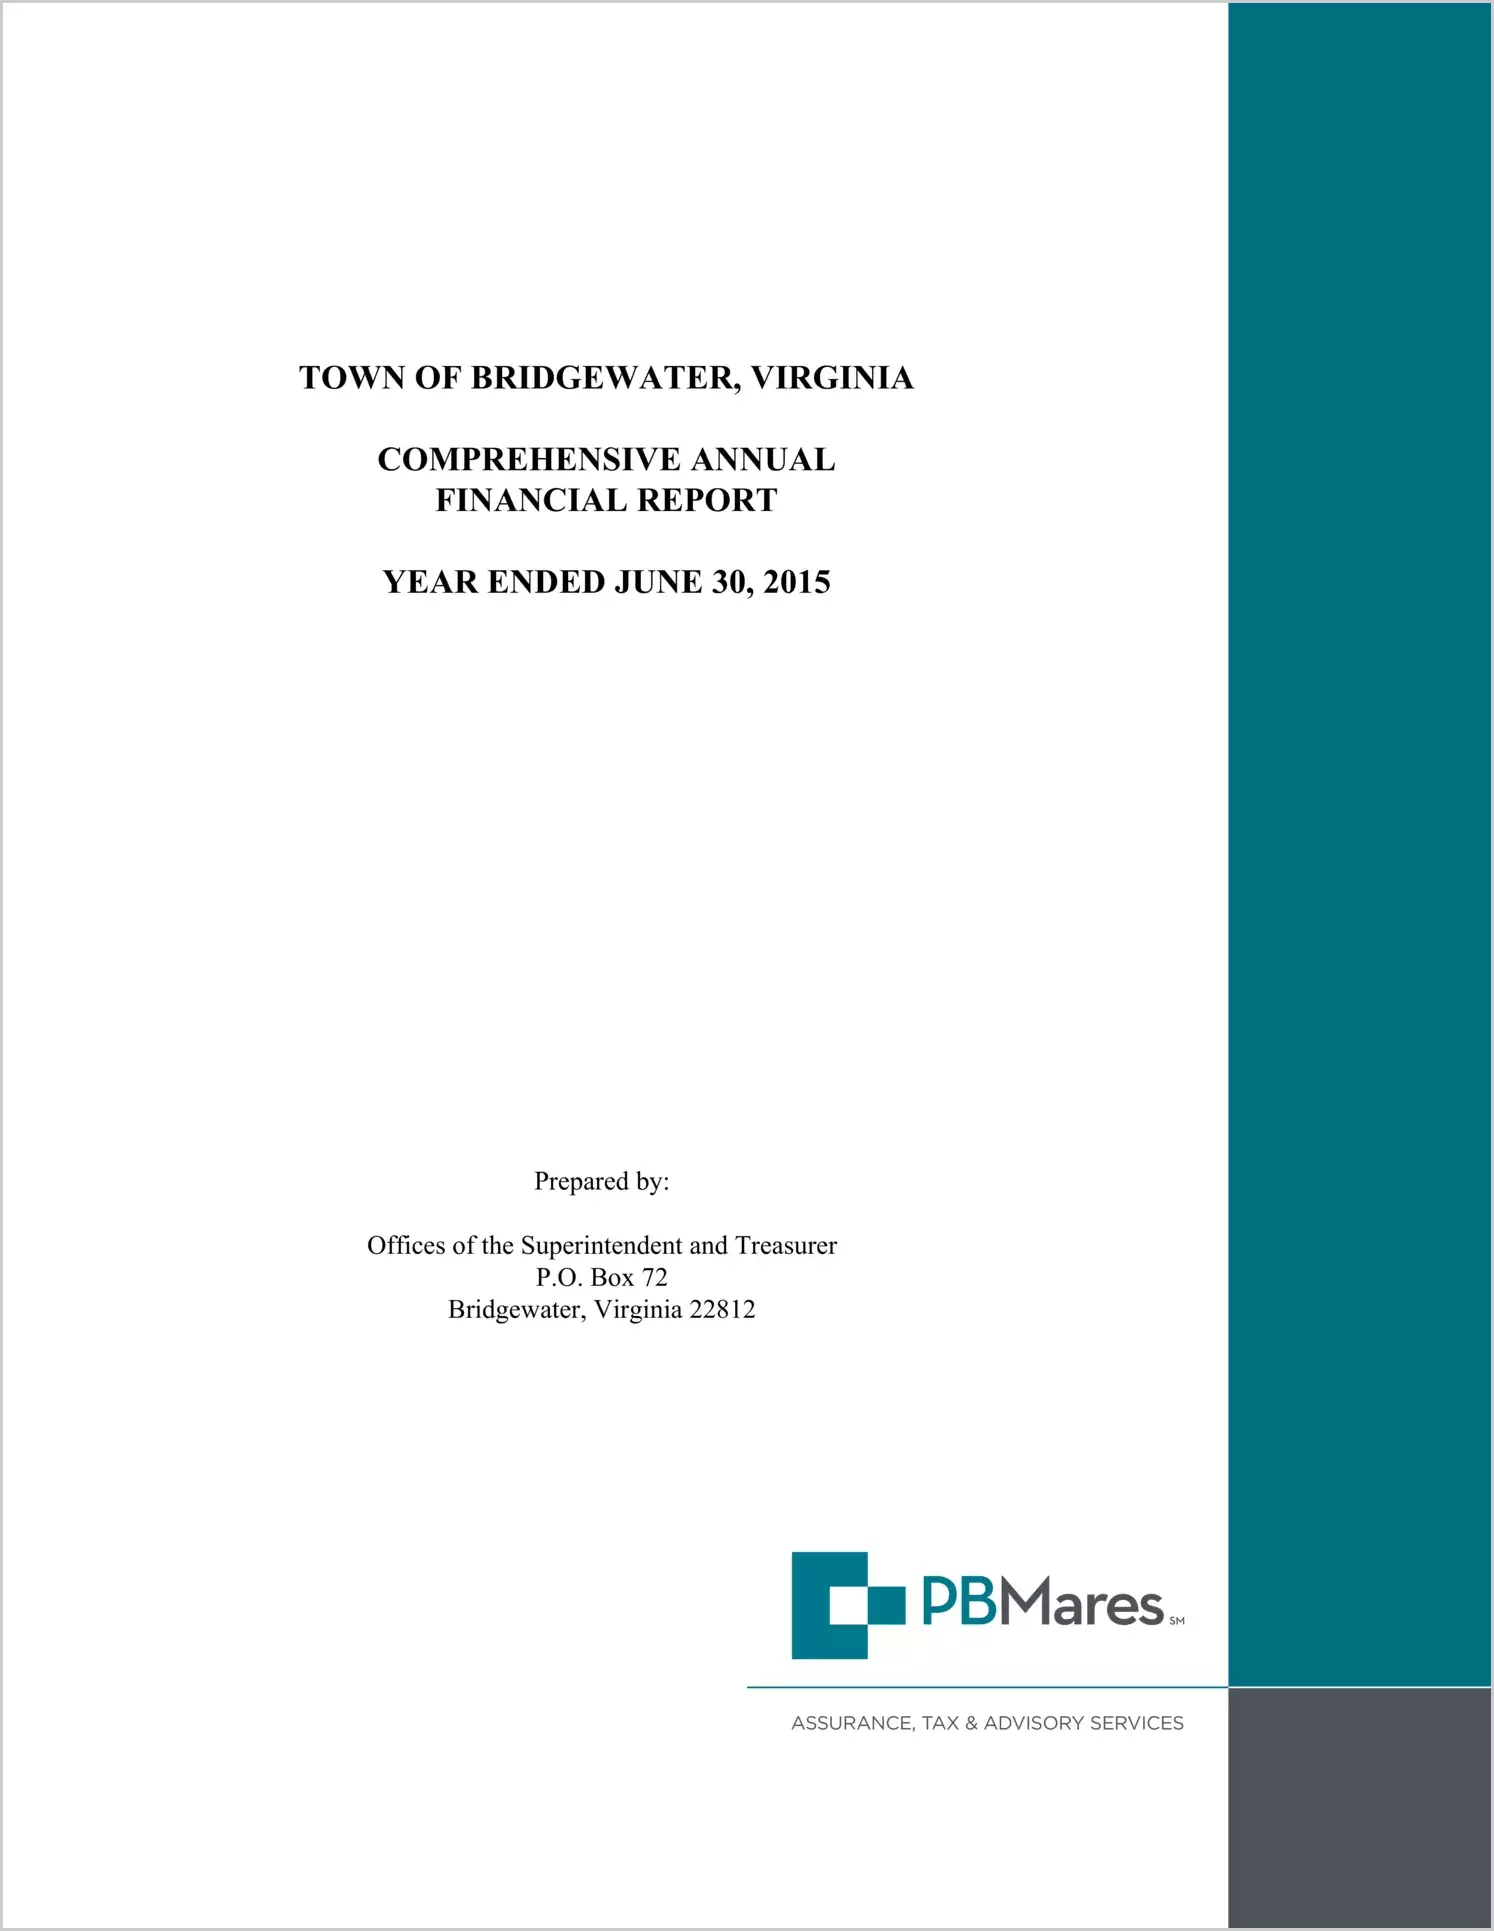 2015 Annual Financial Report for Town of Bridgewater